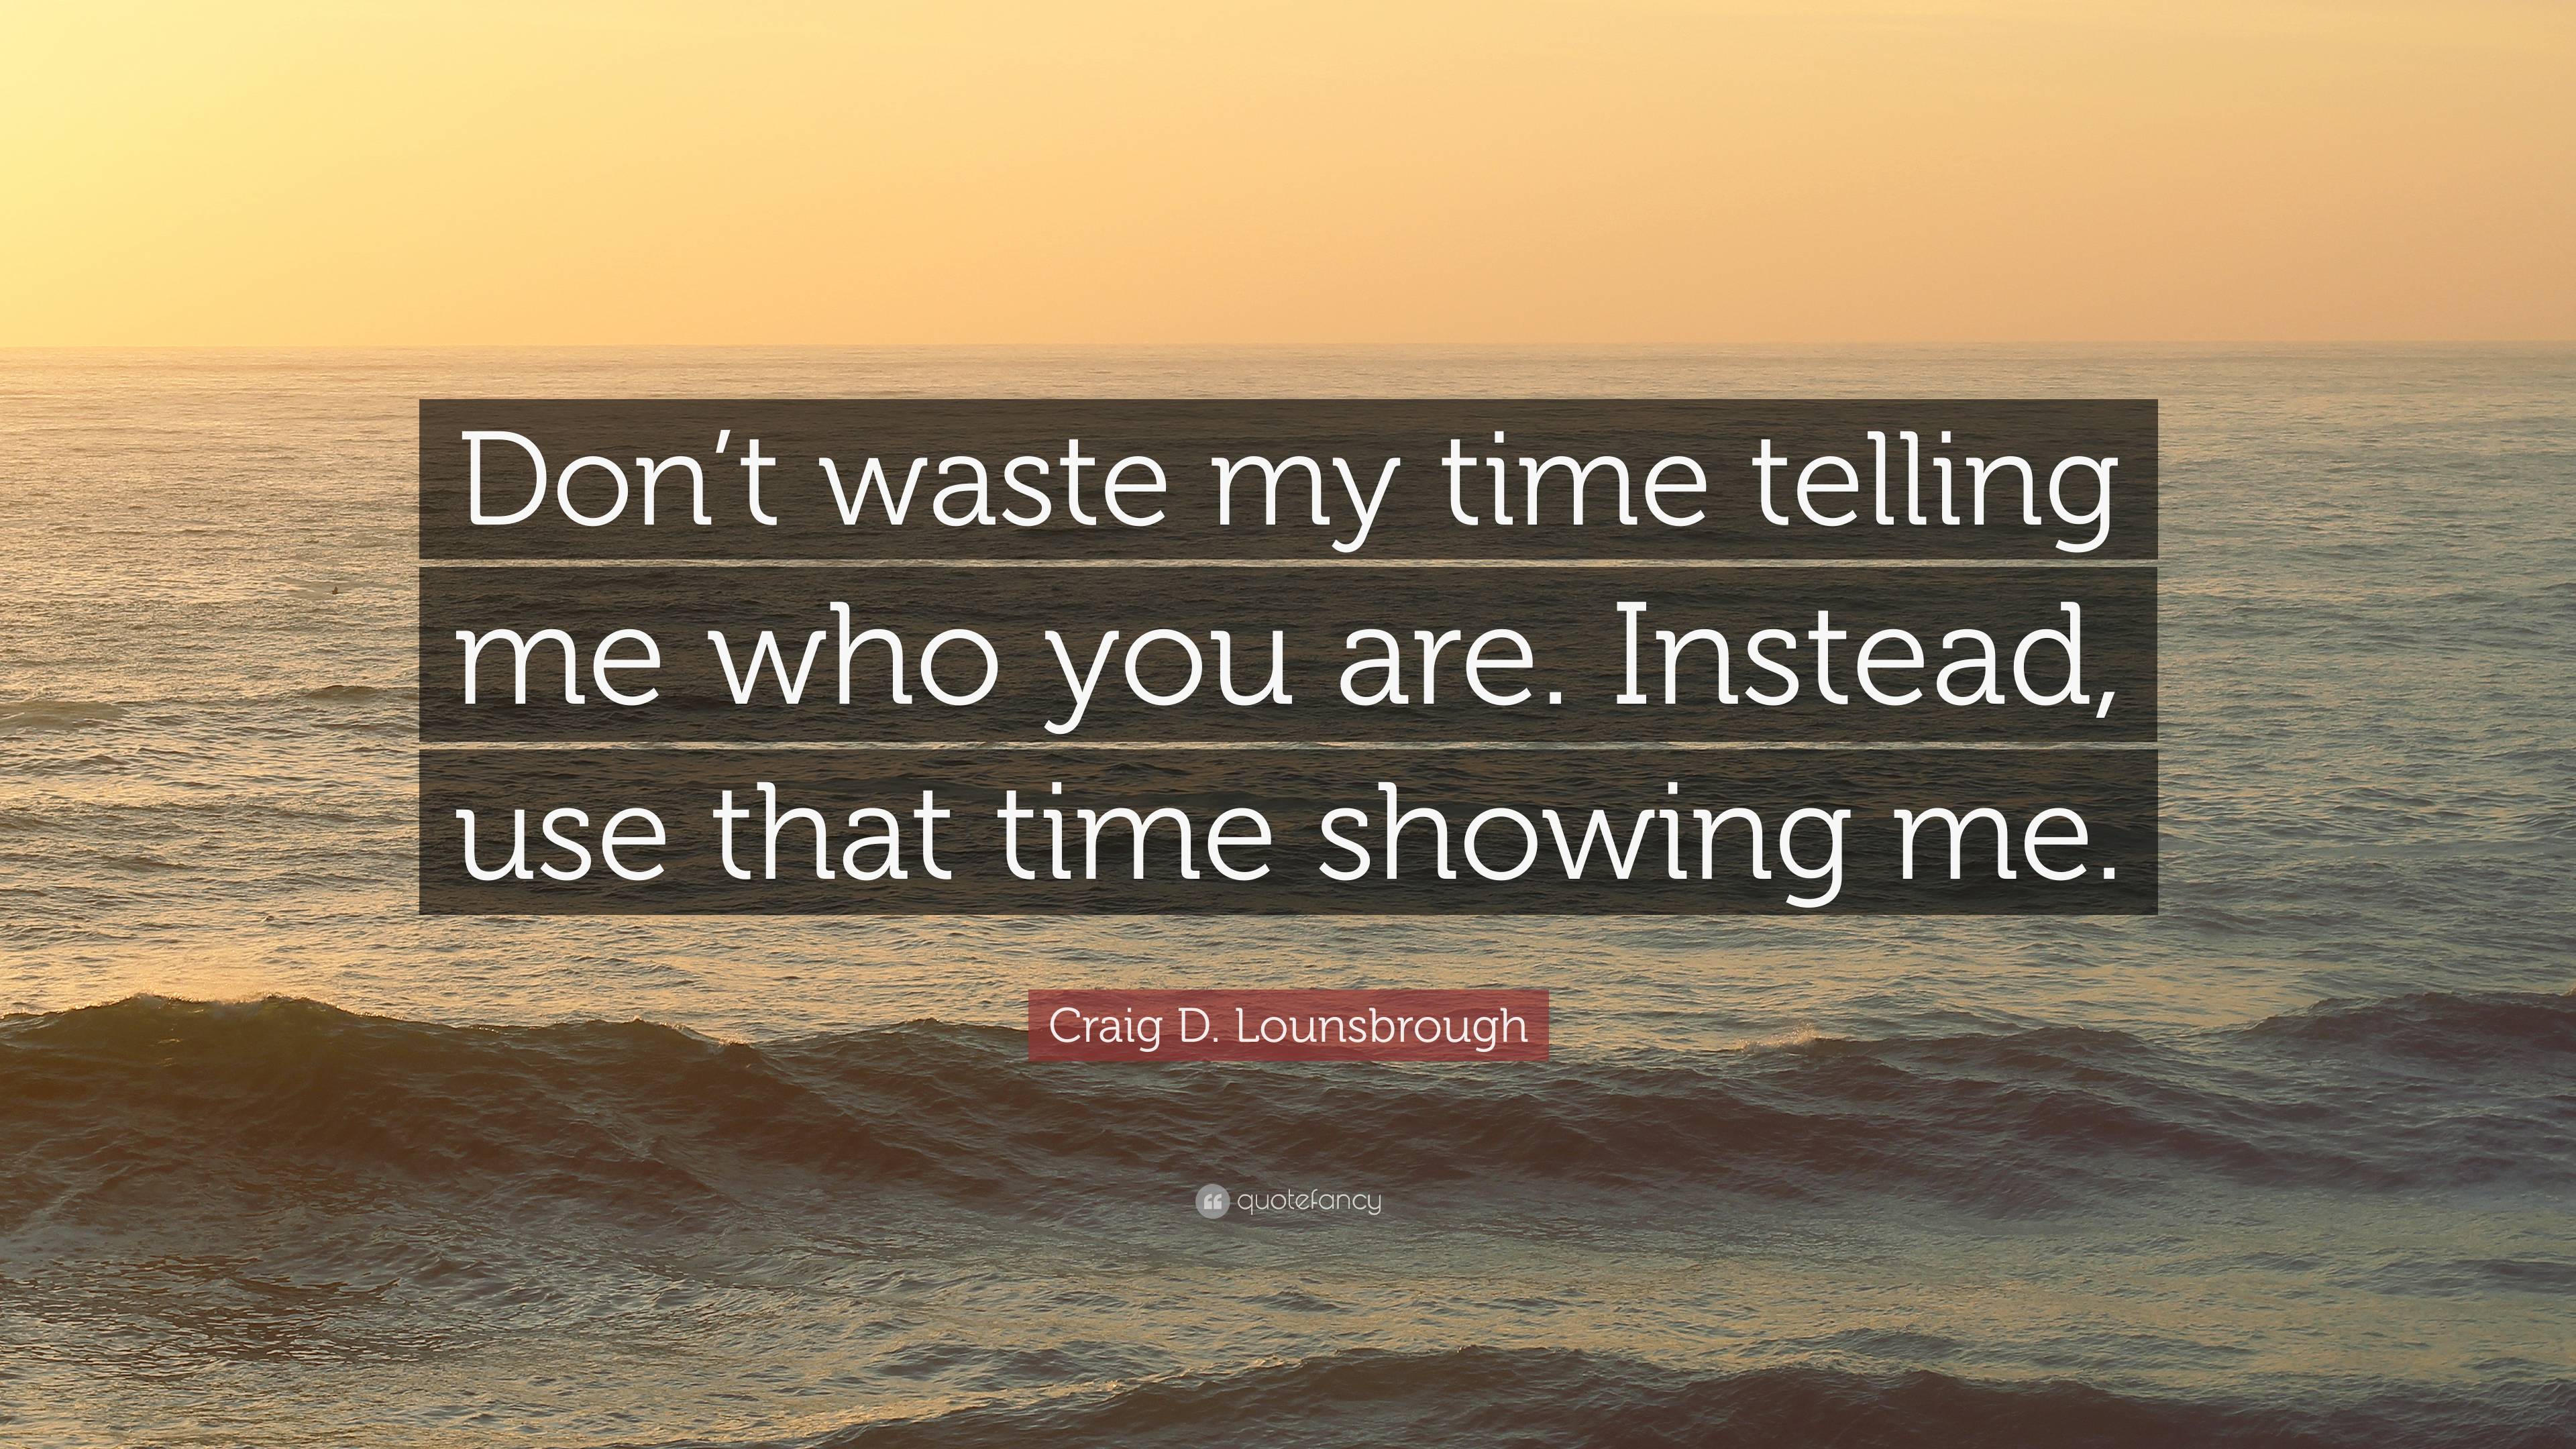 Craig D. Lounsbrough Quote: “Don’t waste my time telling me who you are ...